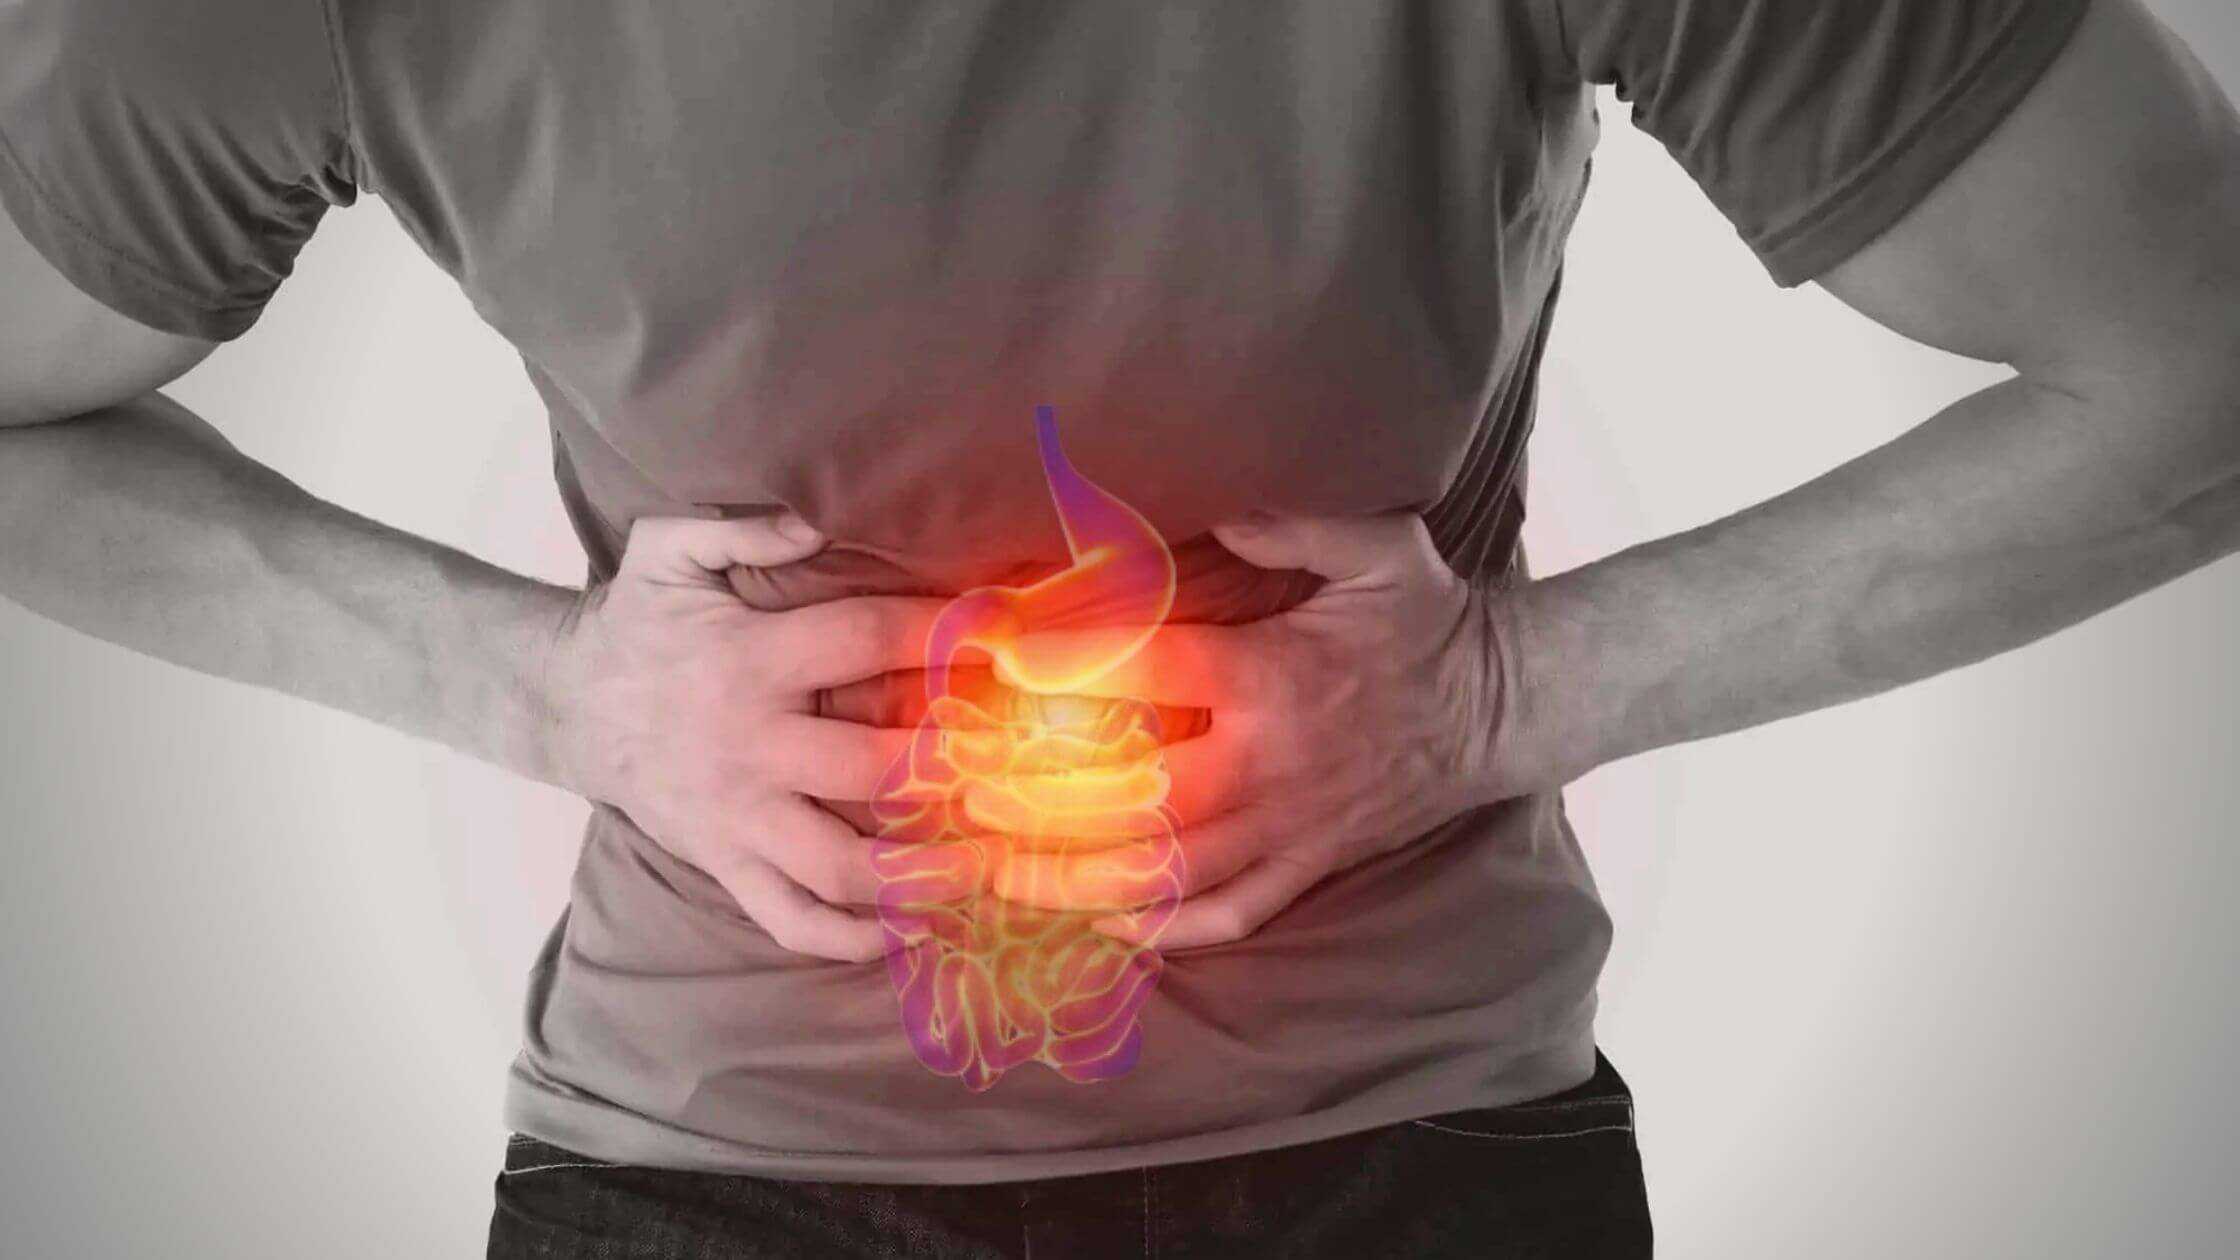 In Mice The Experimental Anti-Obesity Drug Lowers Intestinal Inflammation